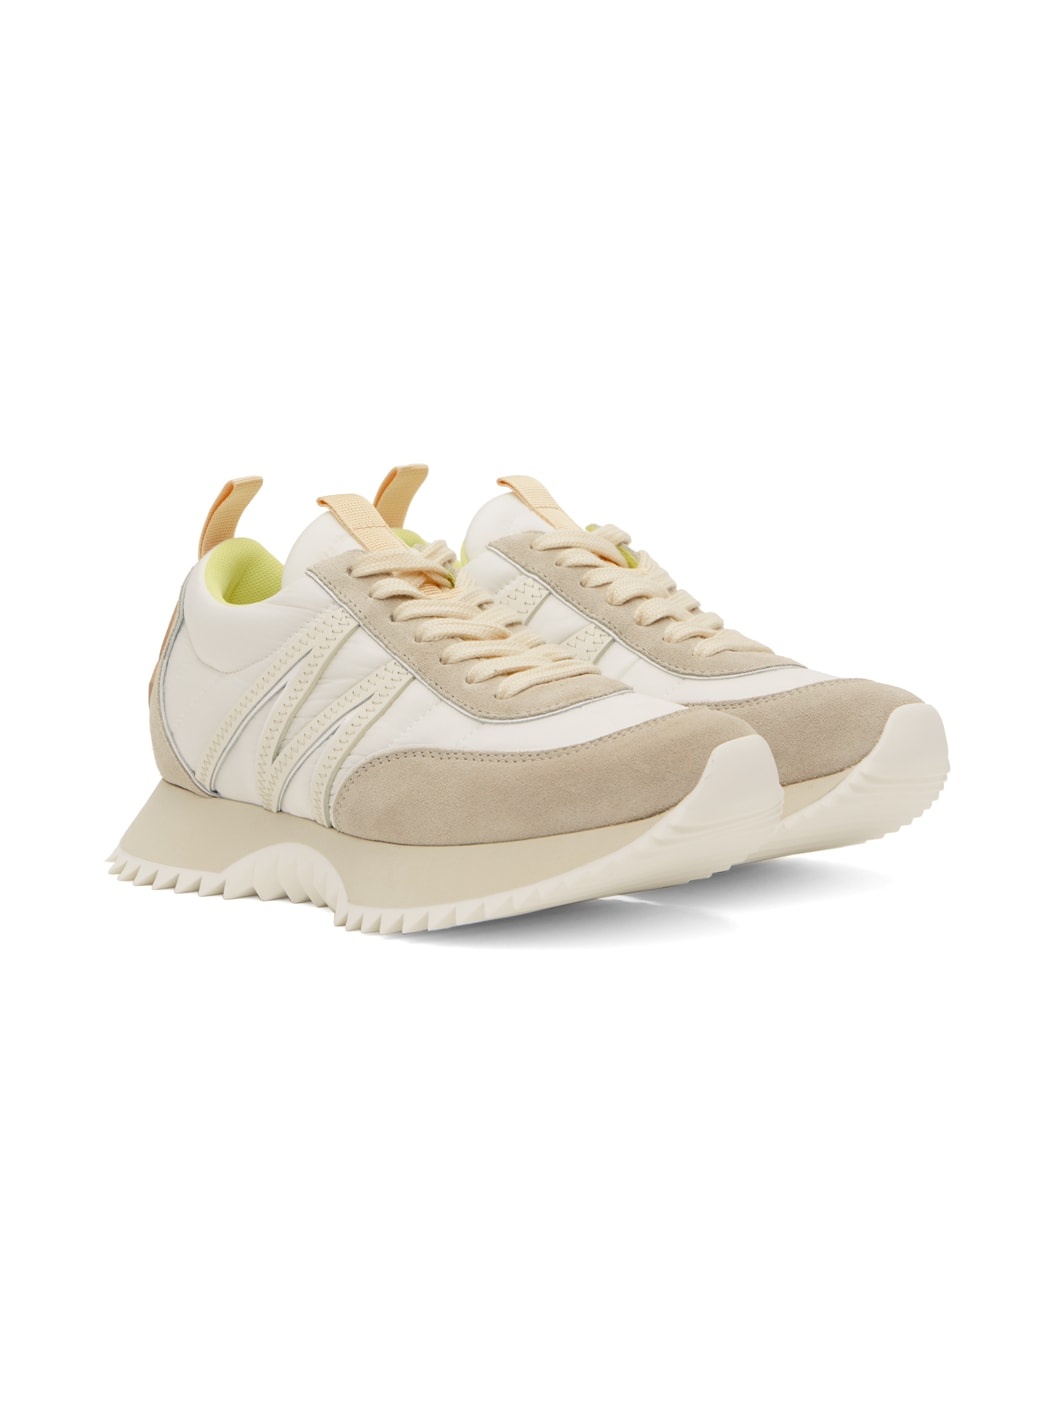 Beige & White Pacey Sneakers - 4